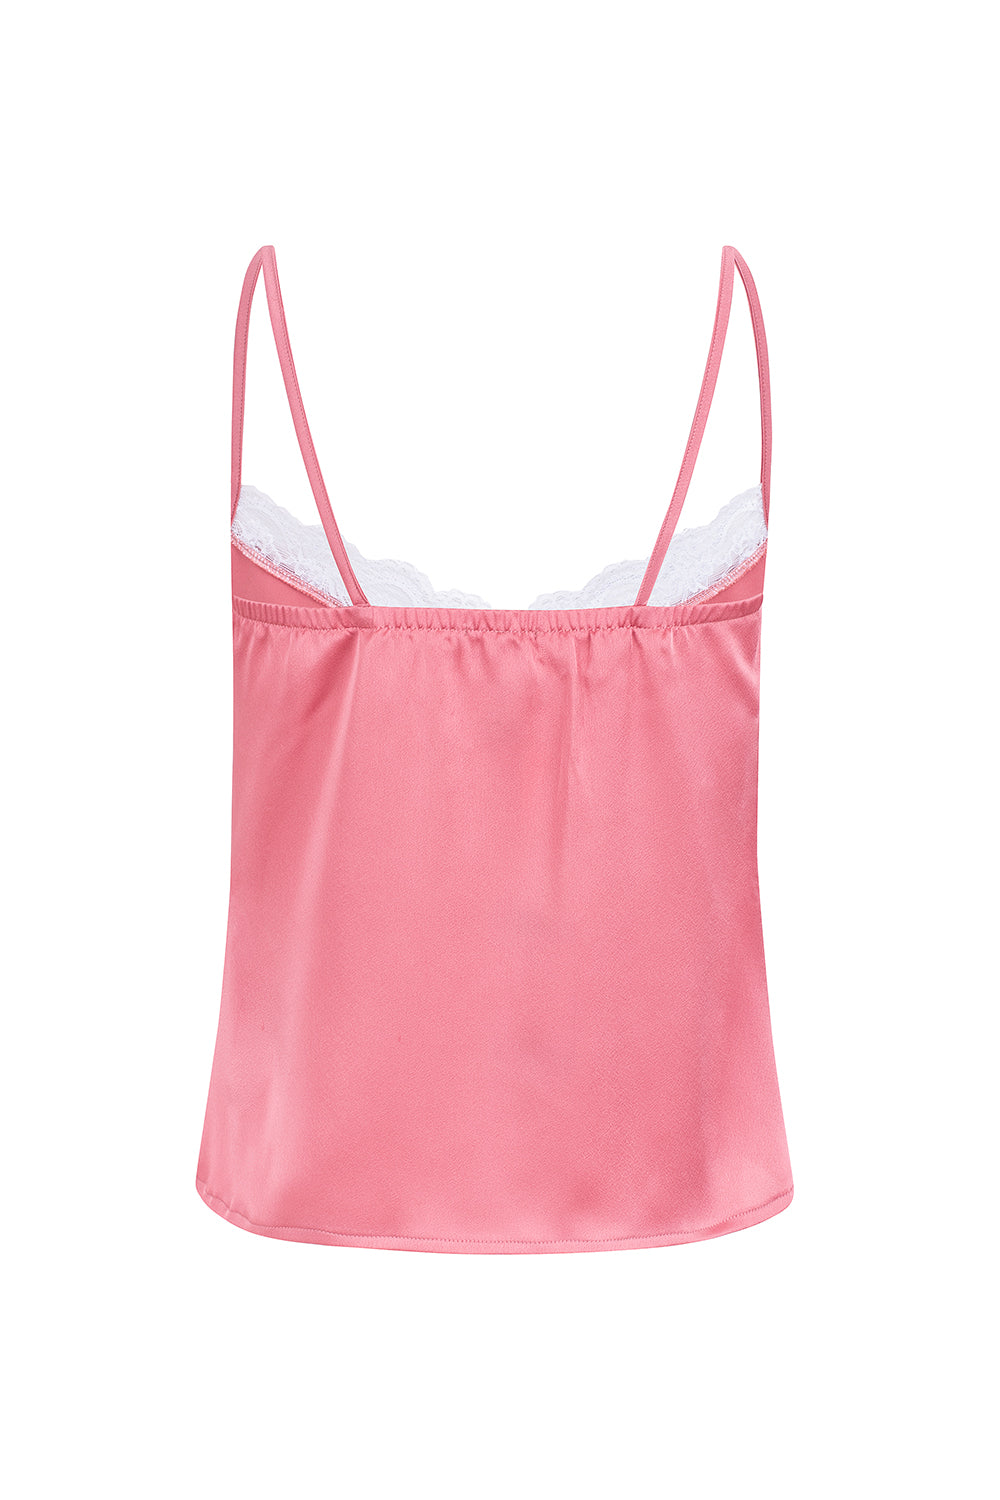 PINK SATIN & LACE TOP (OUT OF STOCK)